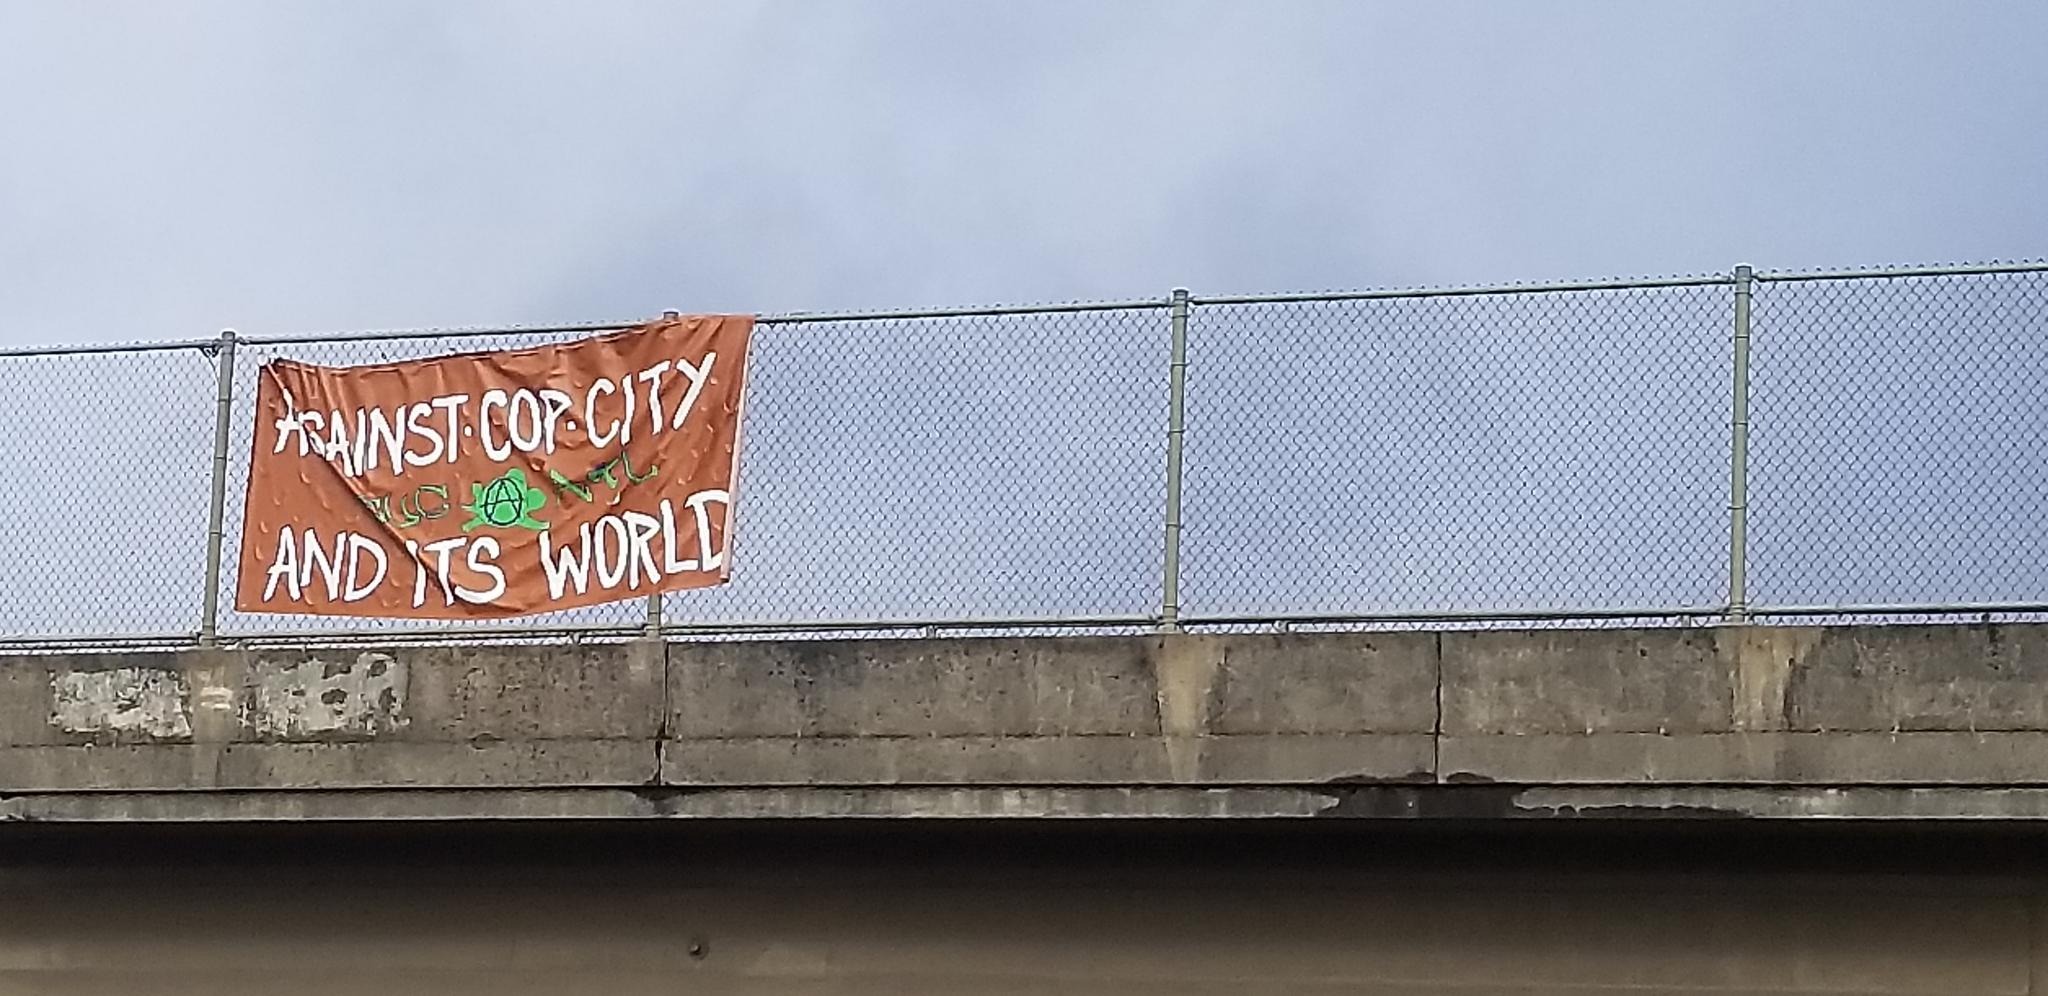 Onto a highway overpass, an orange banner with white text reads "AGAINST COP CITY AND ITS WORLD" with an anarchist circle-A in the center.